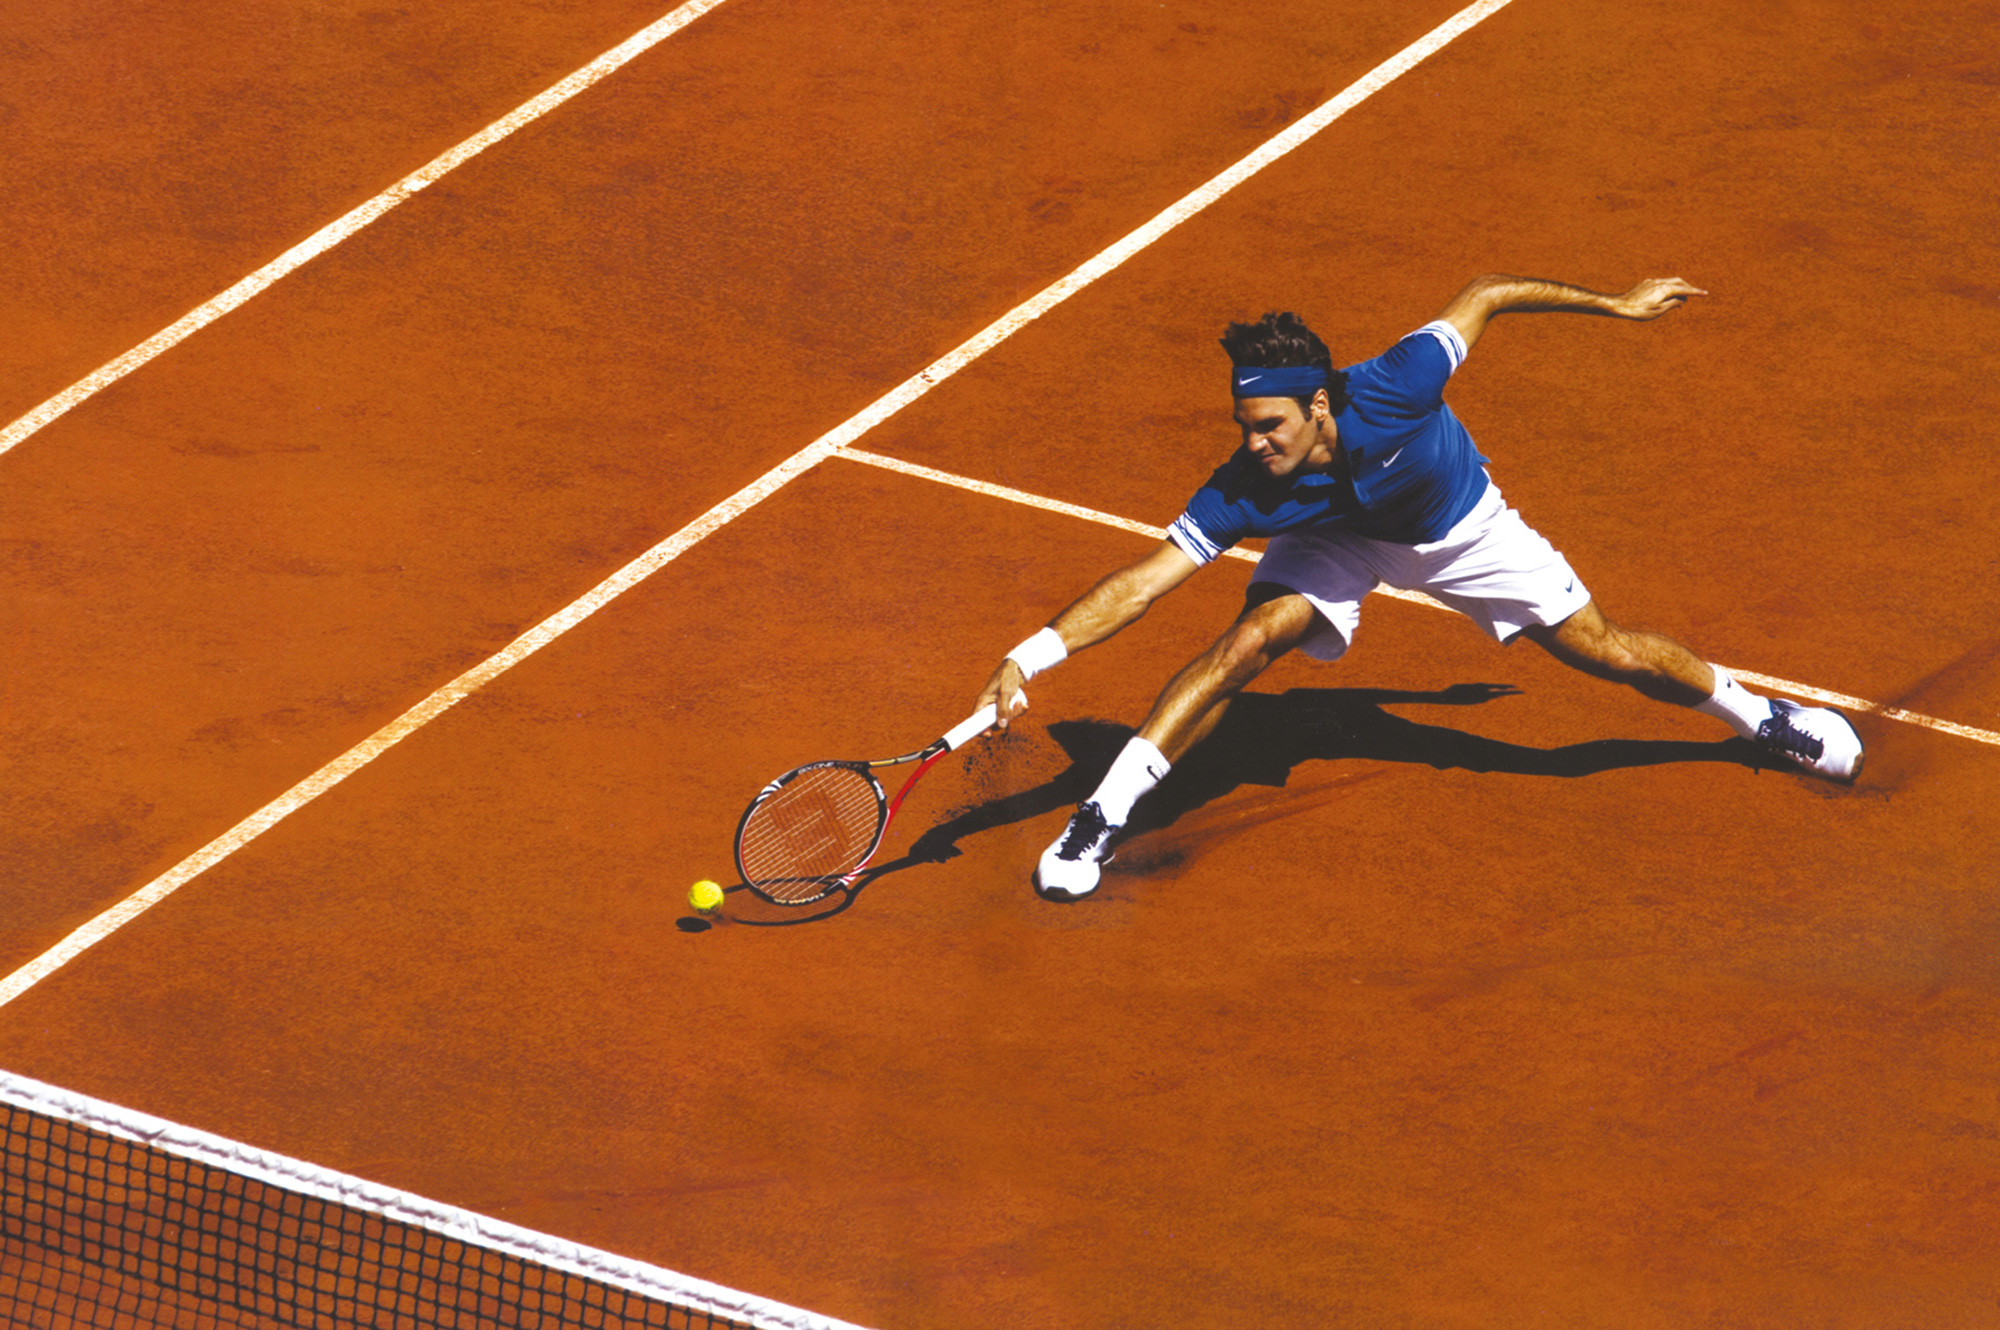 Federer at the 2010 French Open. Photo Mike Powell.